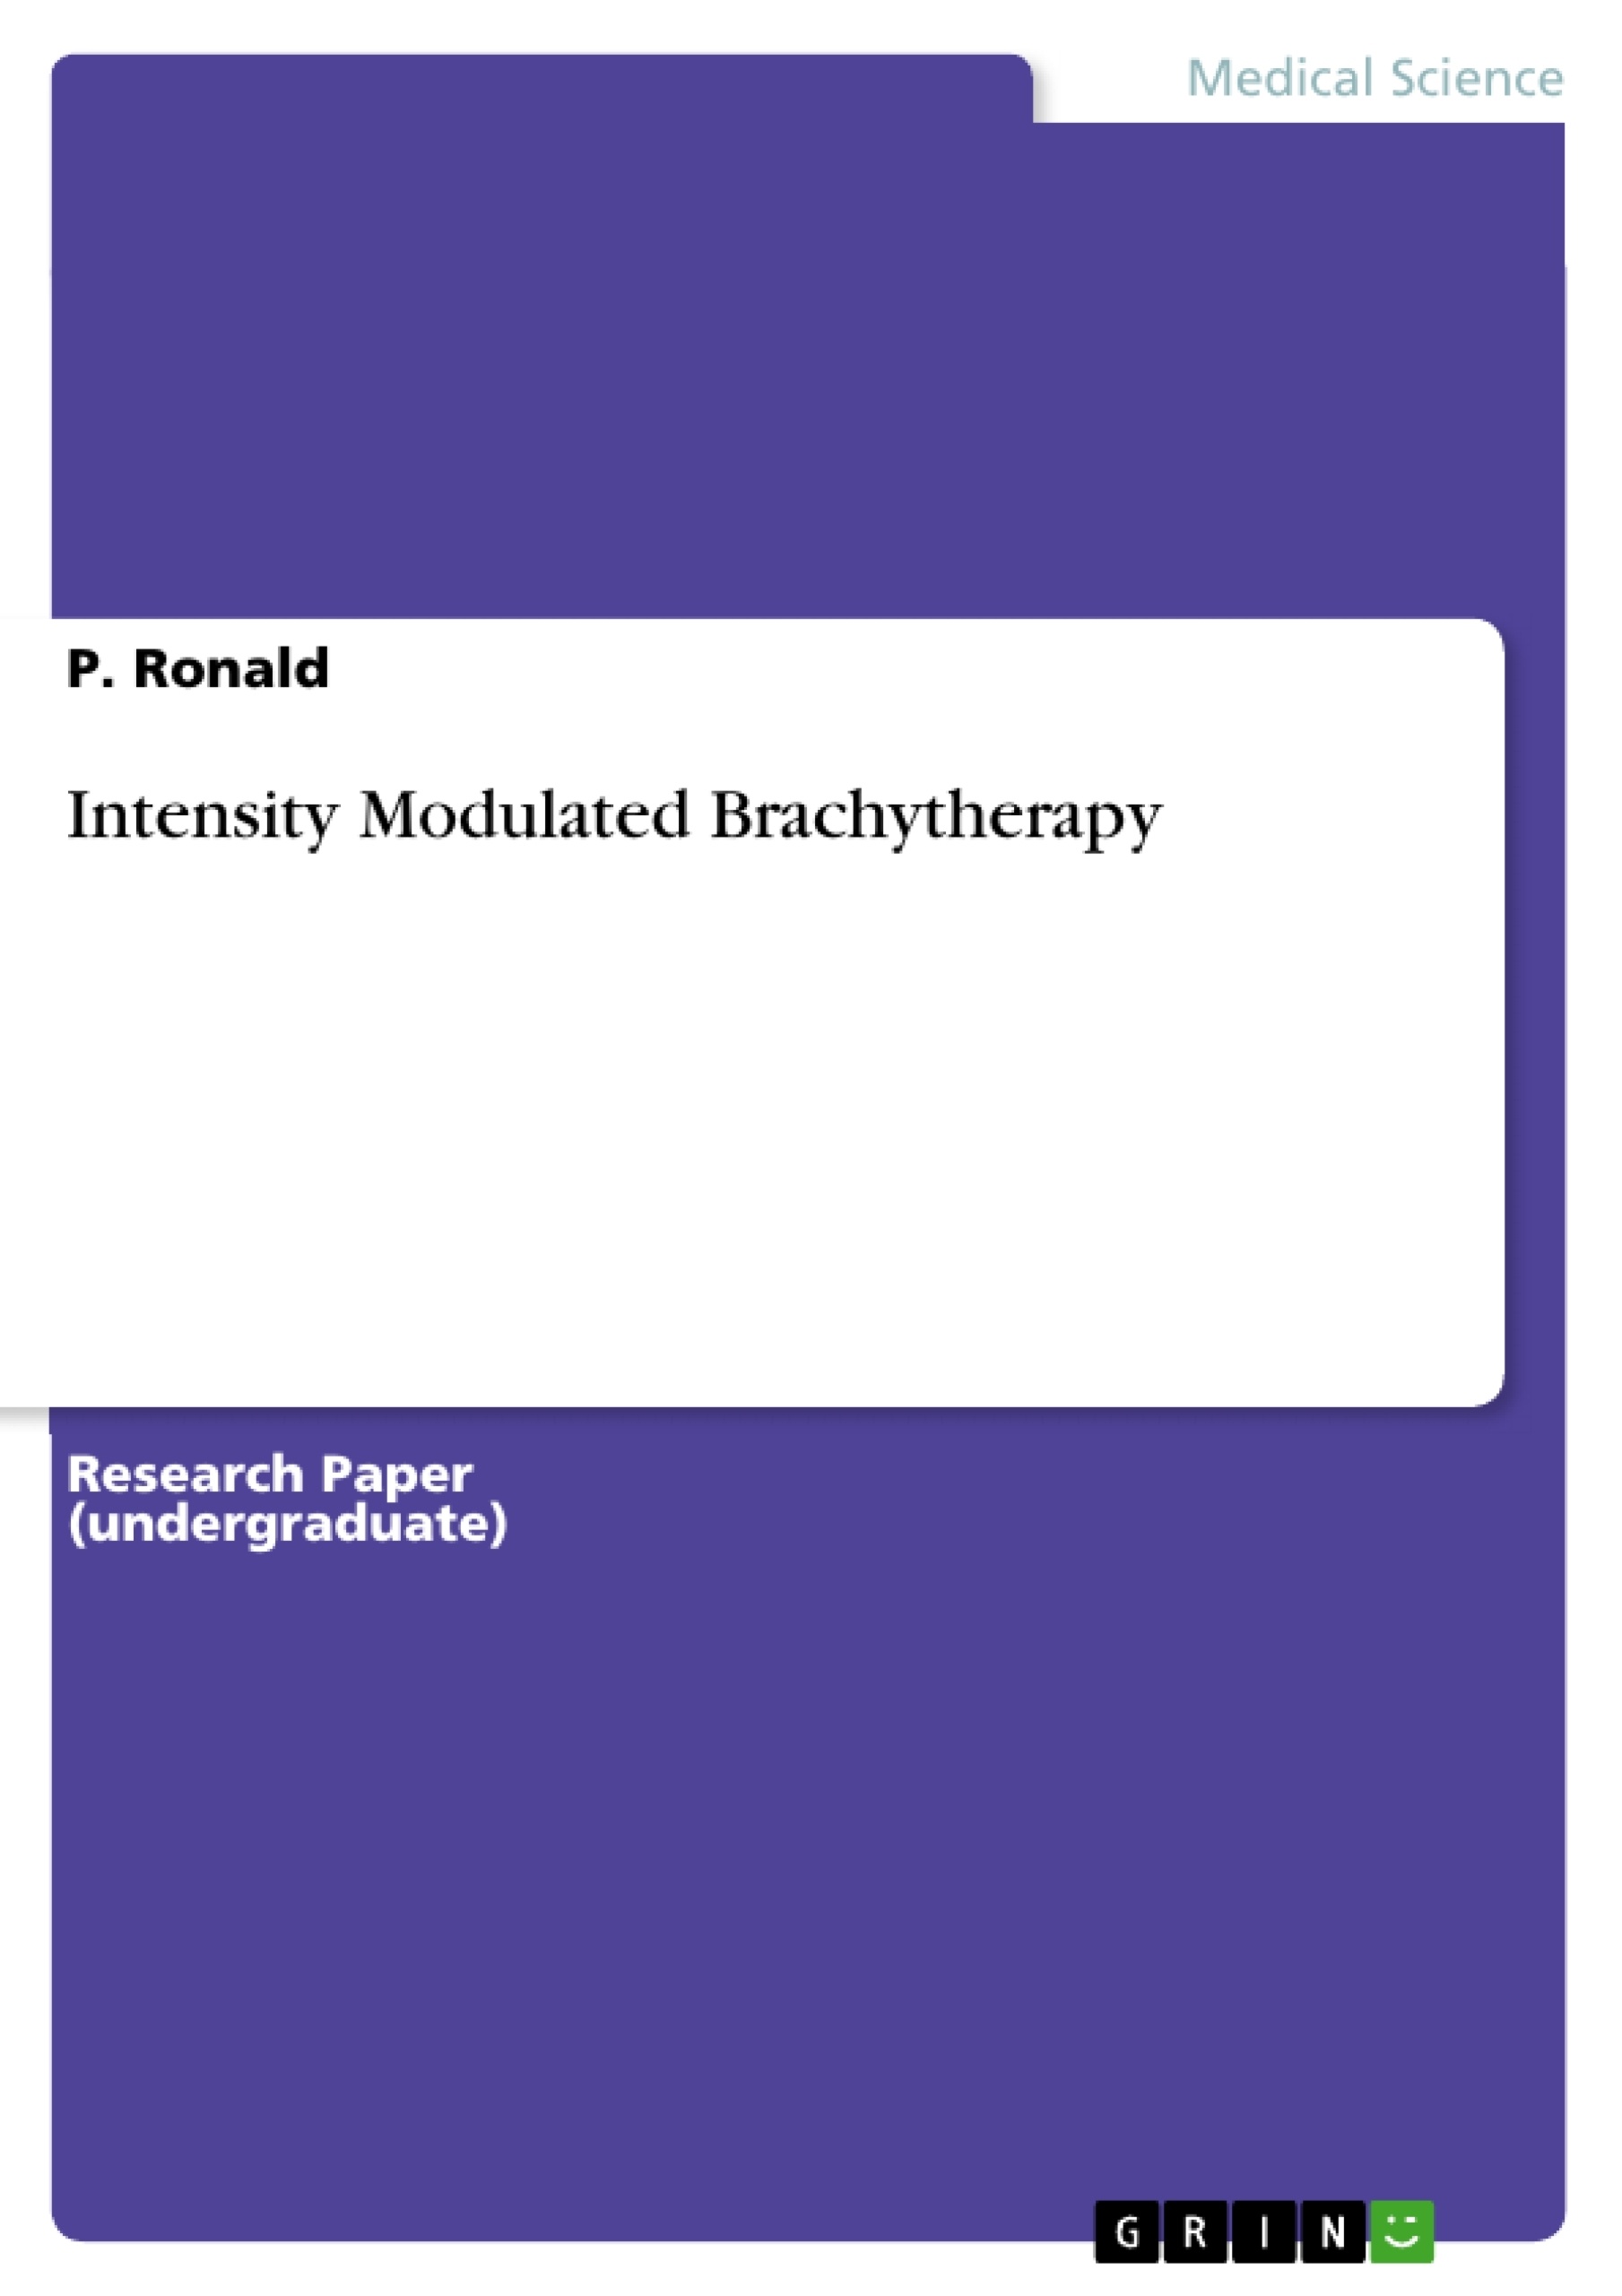 Title: Intensity Modulated Brachytherapy